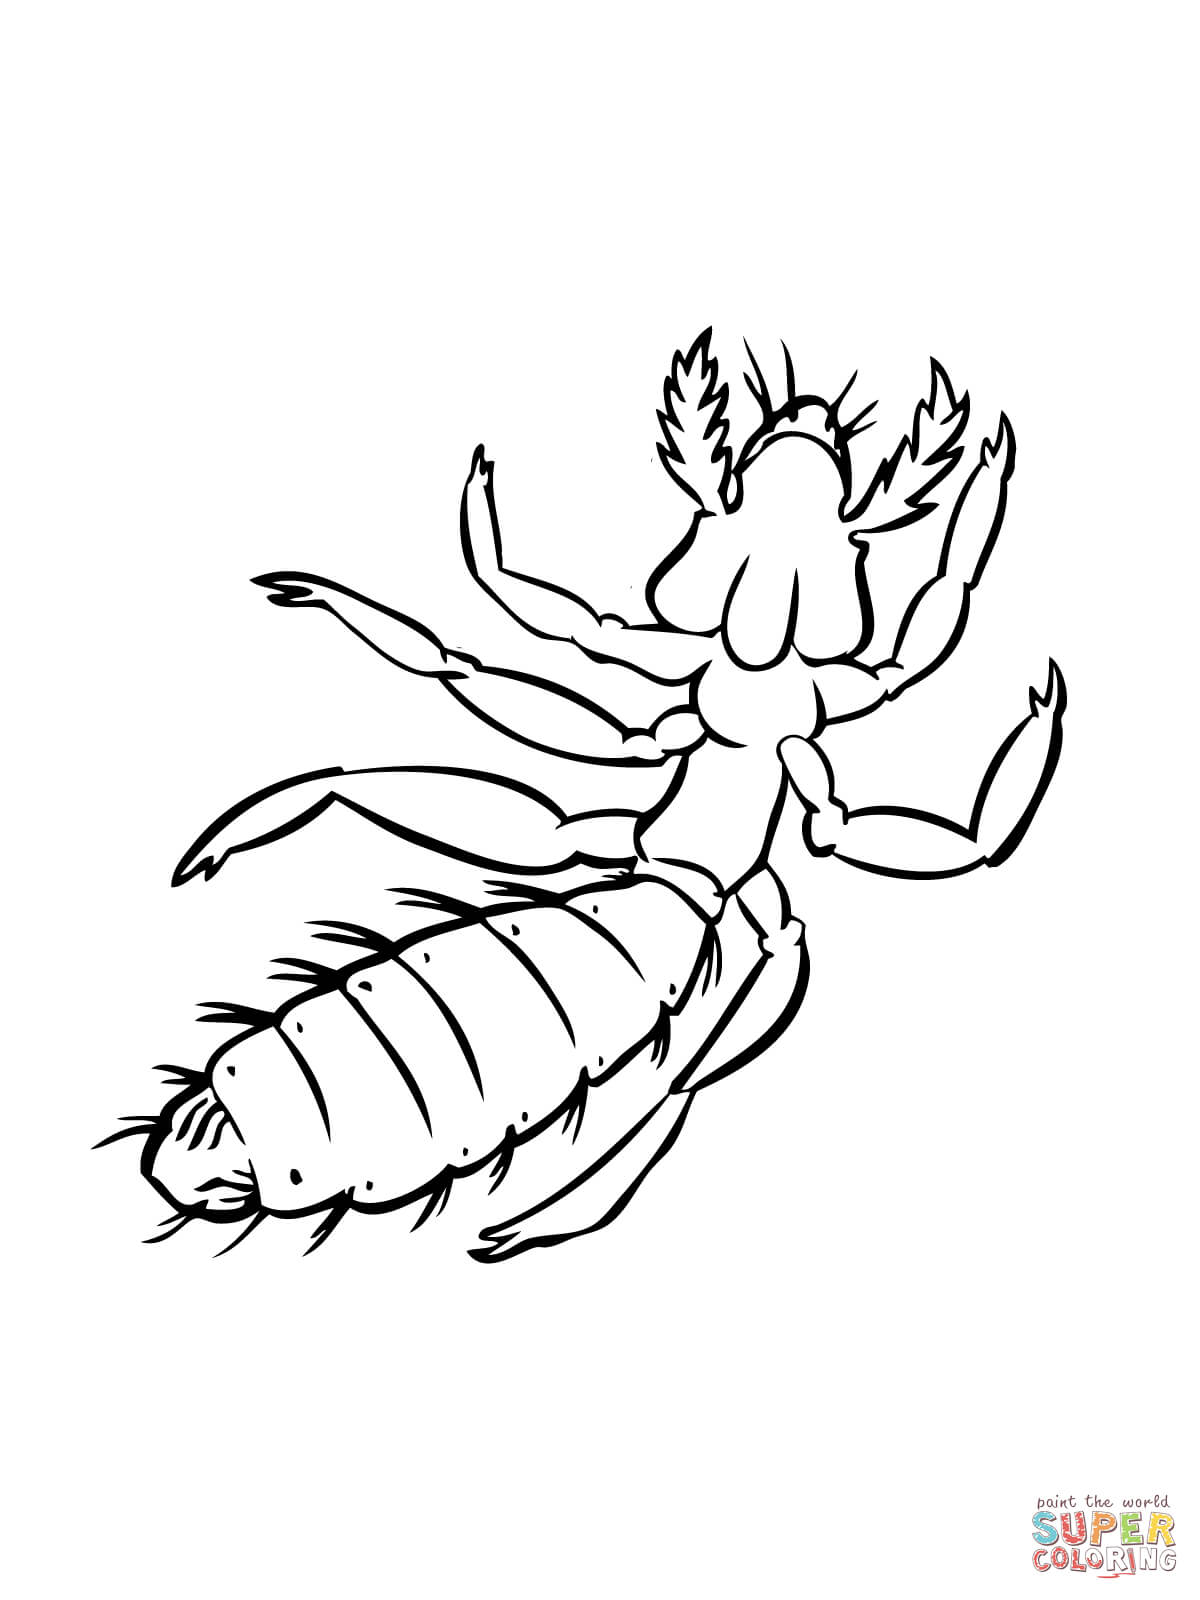 Lice coloring pages | Free Coloring Pages